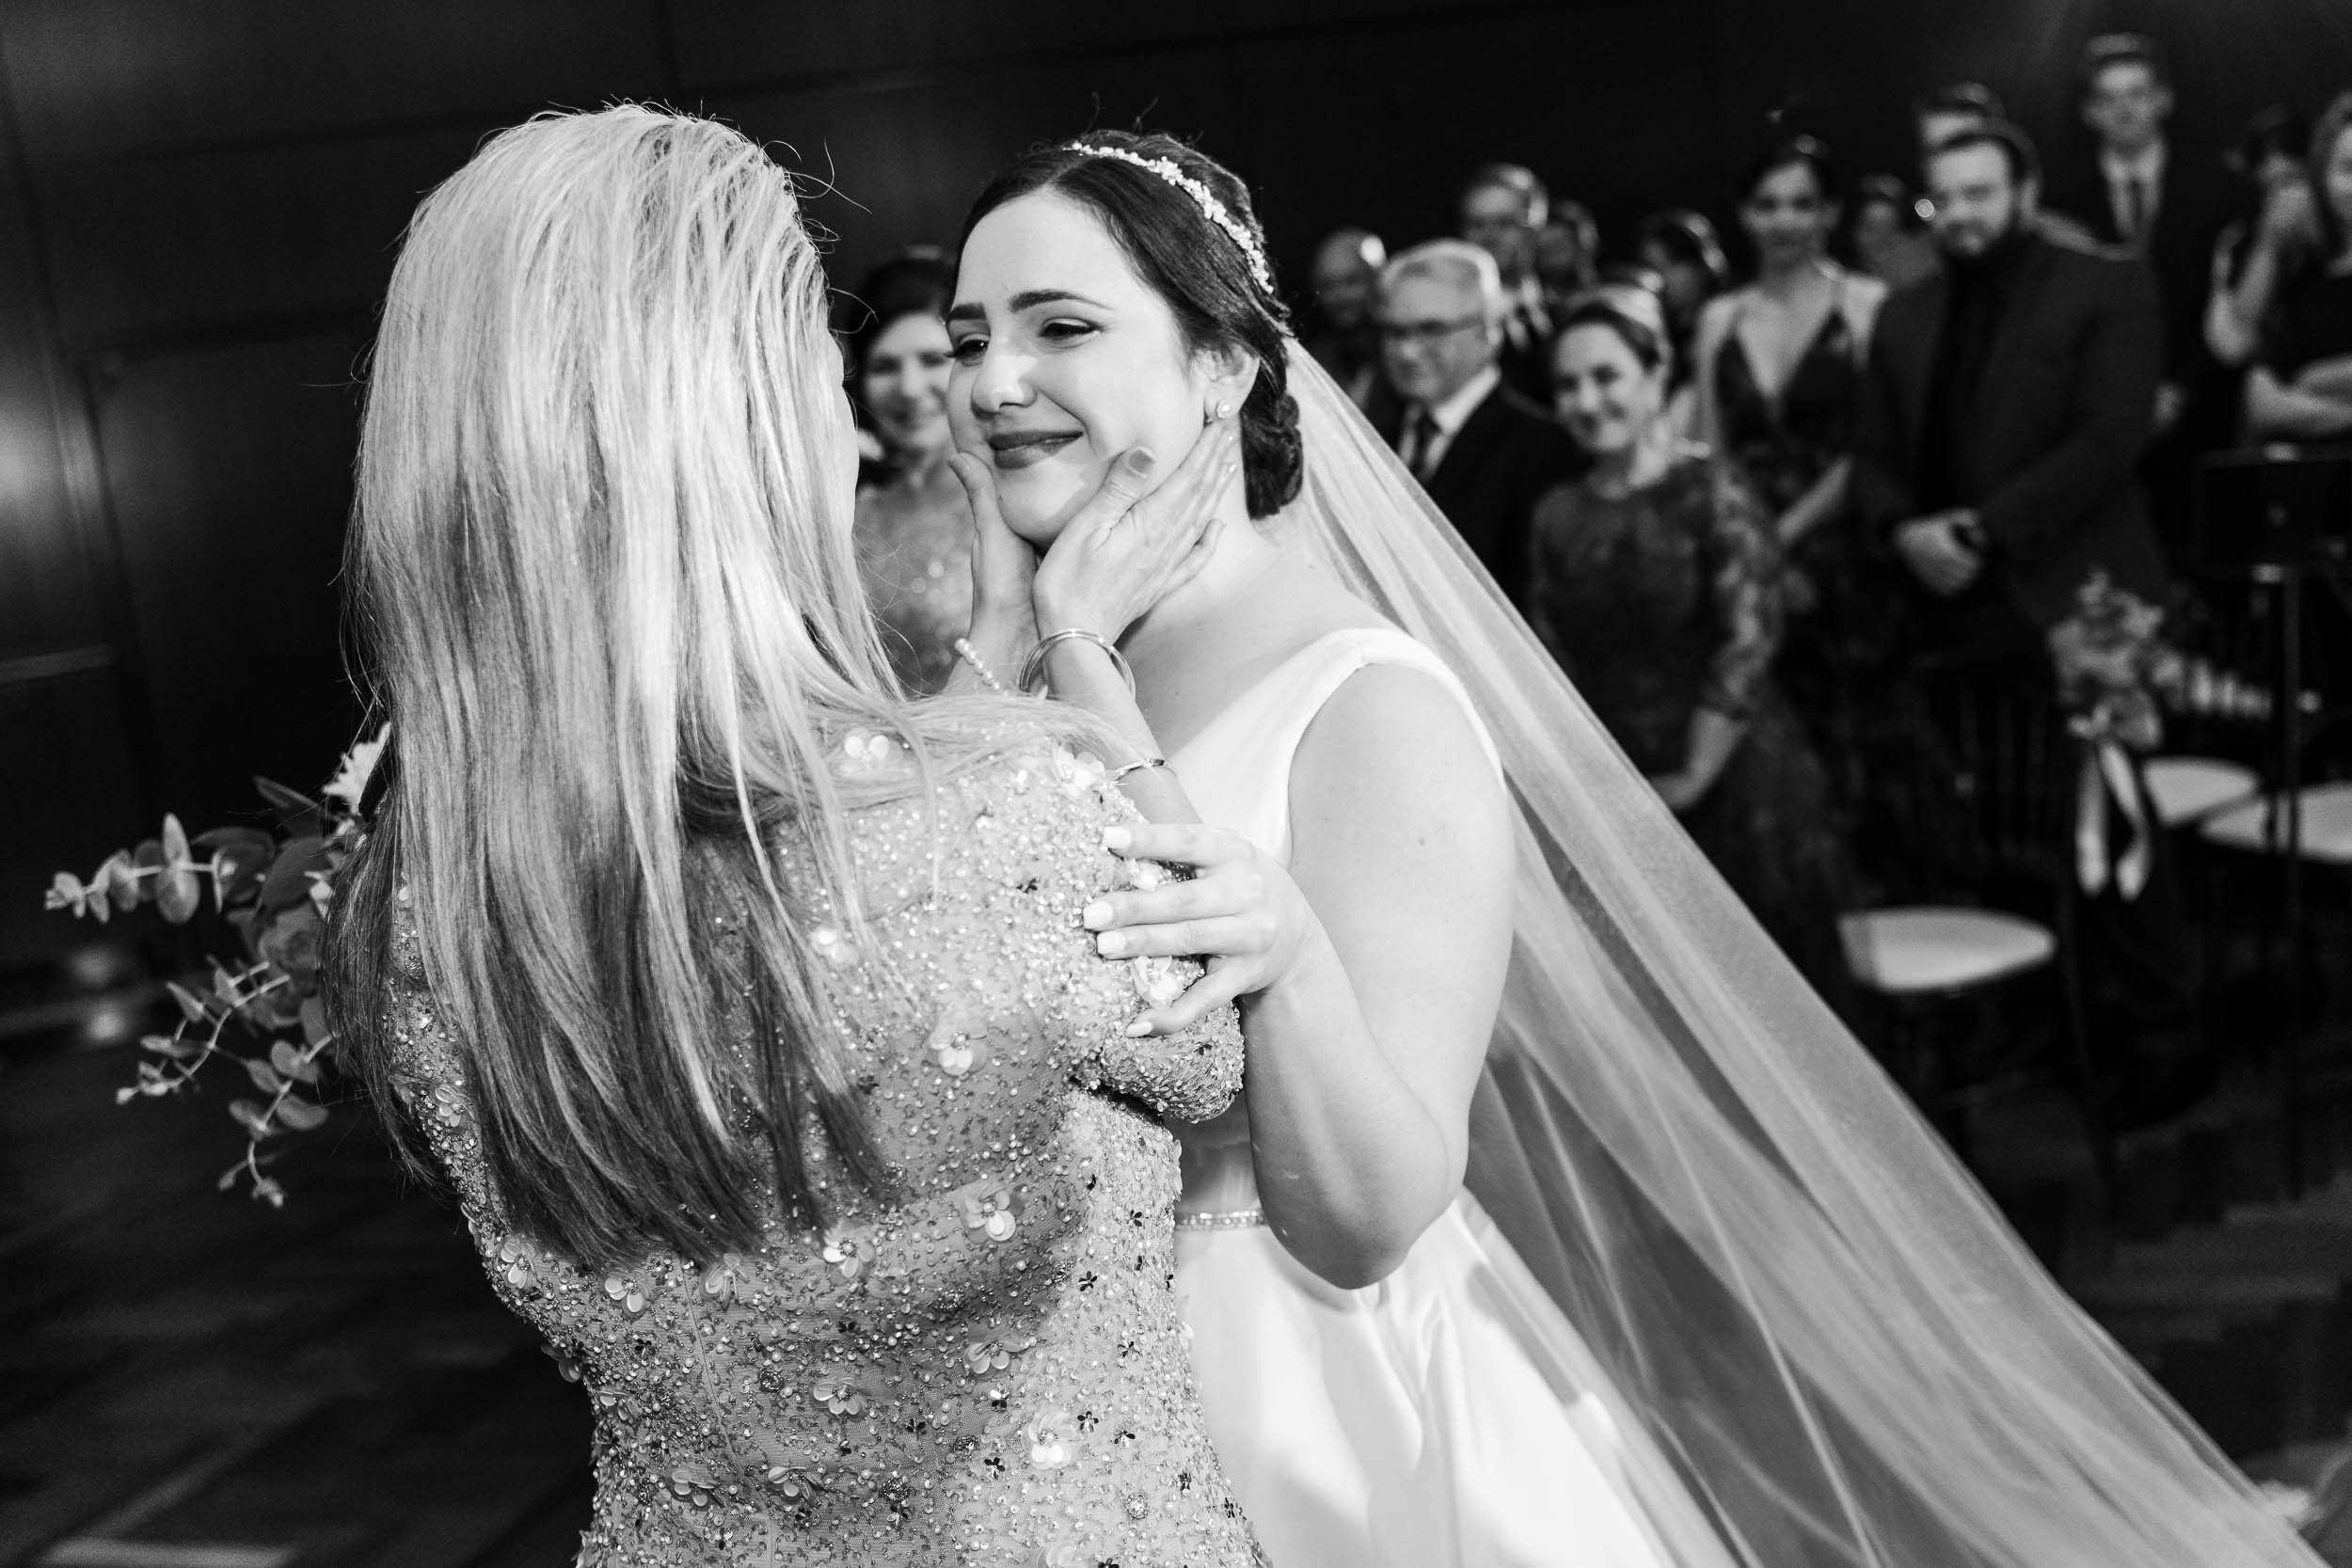 Wedding Day Photos | Newberry Library | J. Brown Photography | mom and bride embrace during the ceremony.